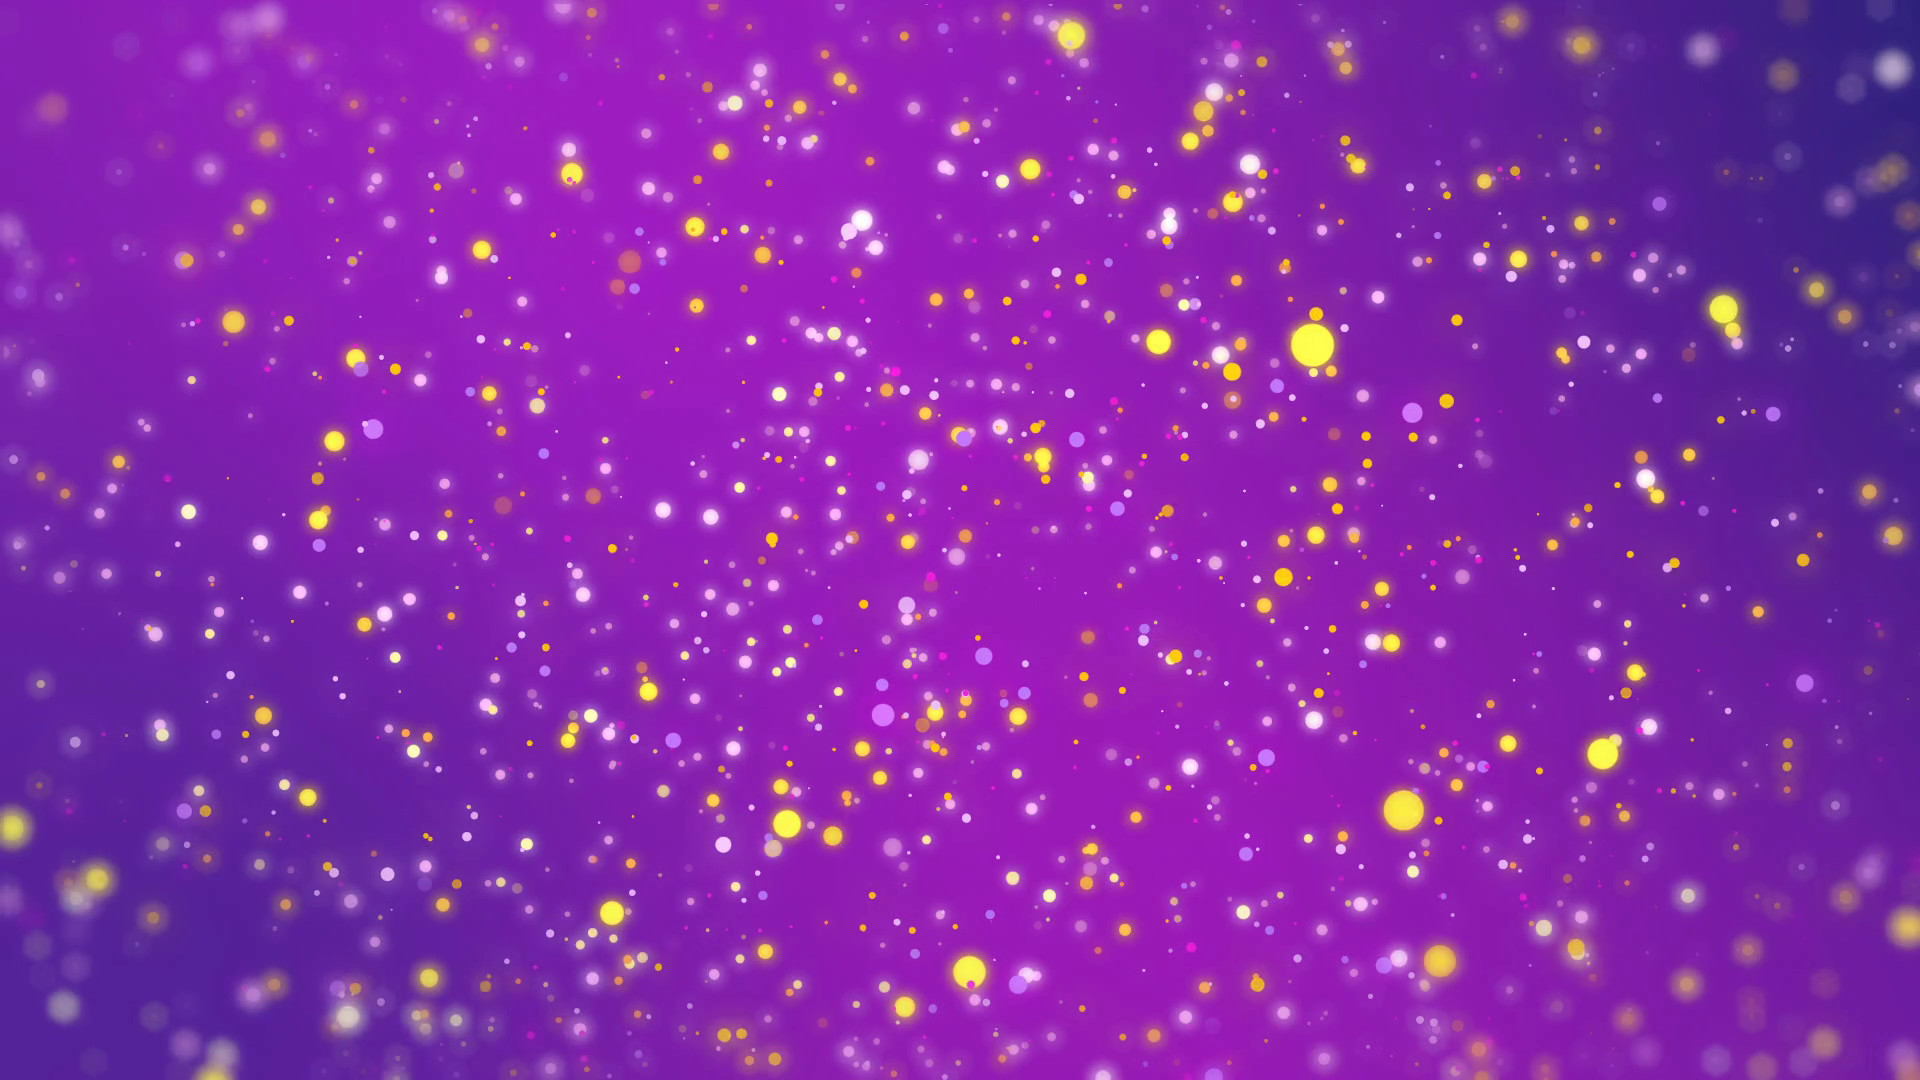 1920x1080 Magical glitter background with blurred edges and glowing colorful light  white and yellow particles flickering against purple backdrop Motion  Background - ...